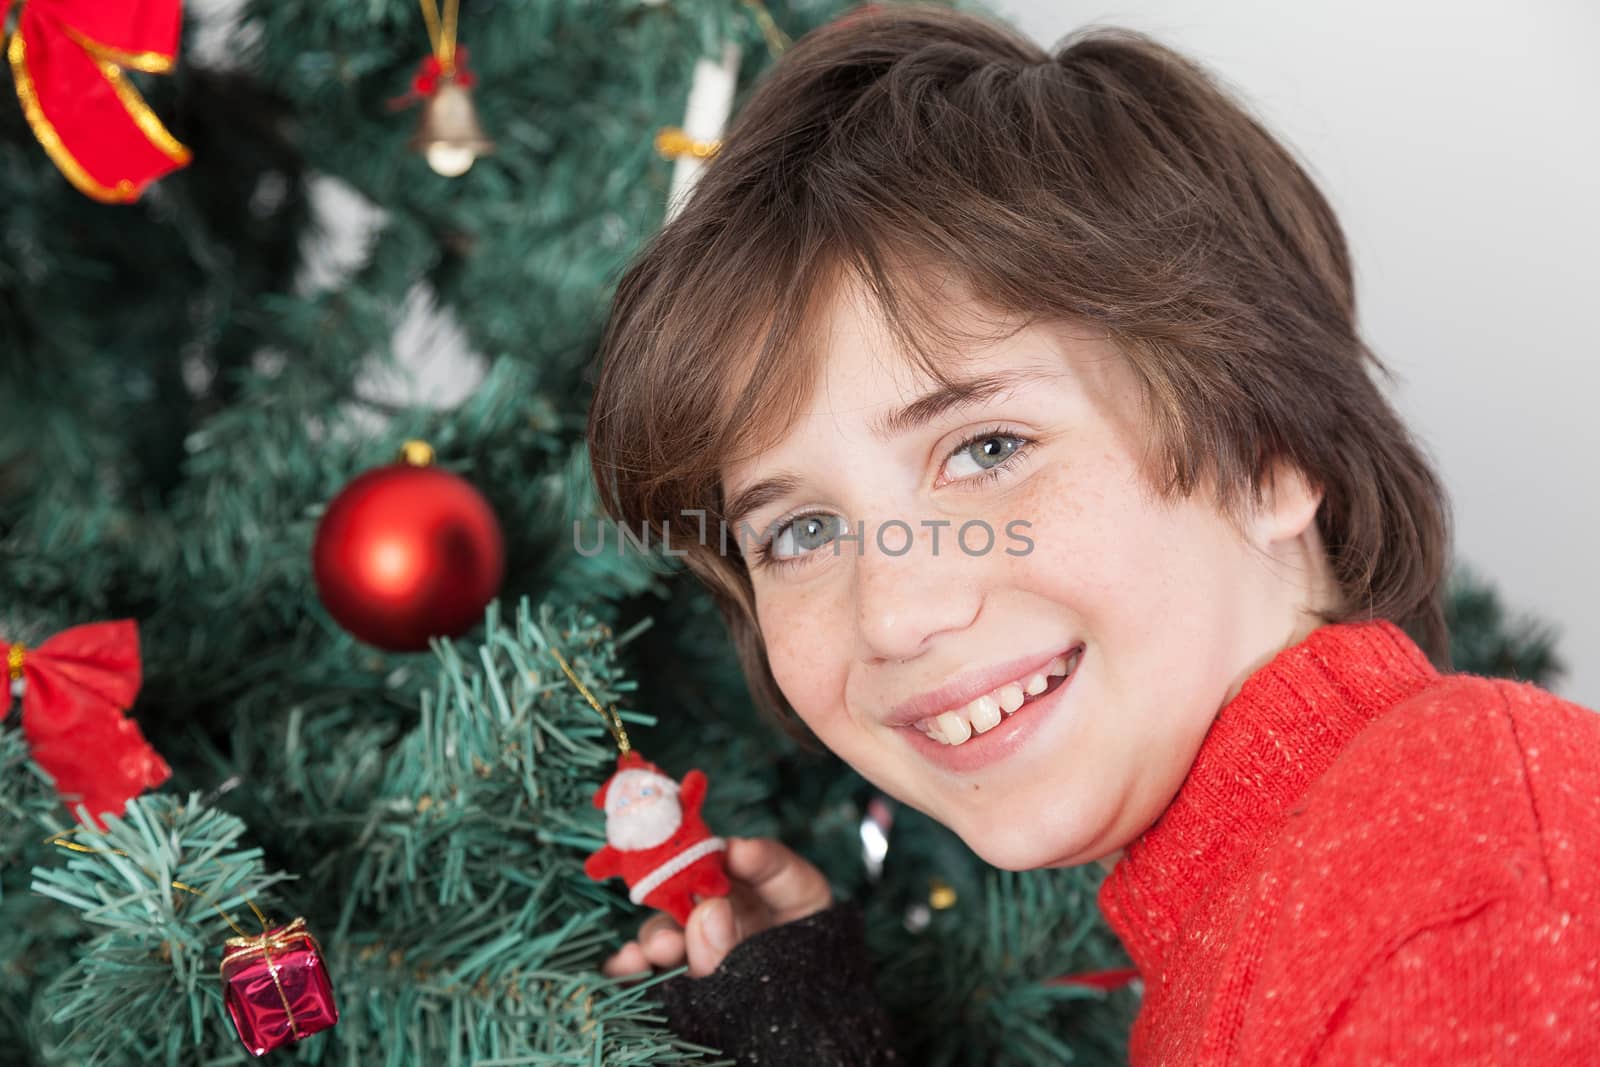 10-12, anticipation, backroud, ball, balls, boy, camera, casual, caucasian, christmas, christmastime, decorating, decorations, eyes, glass, green, holding, holiday, home, indoors, juice, look, looking, male, model, old, people, property, red, releases, situation, teenager, tree, horizontal, white, years, portrait